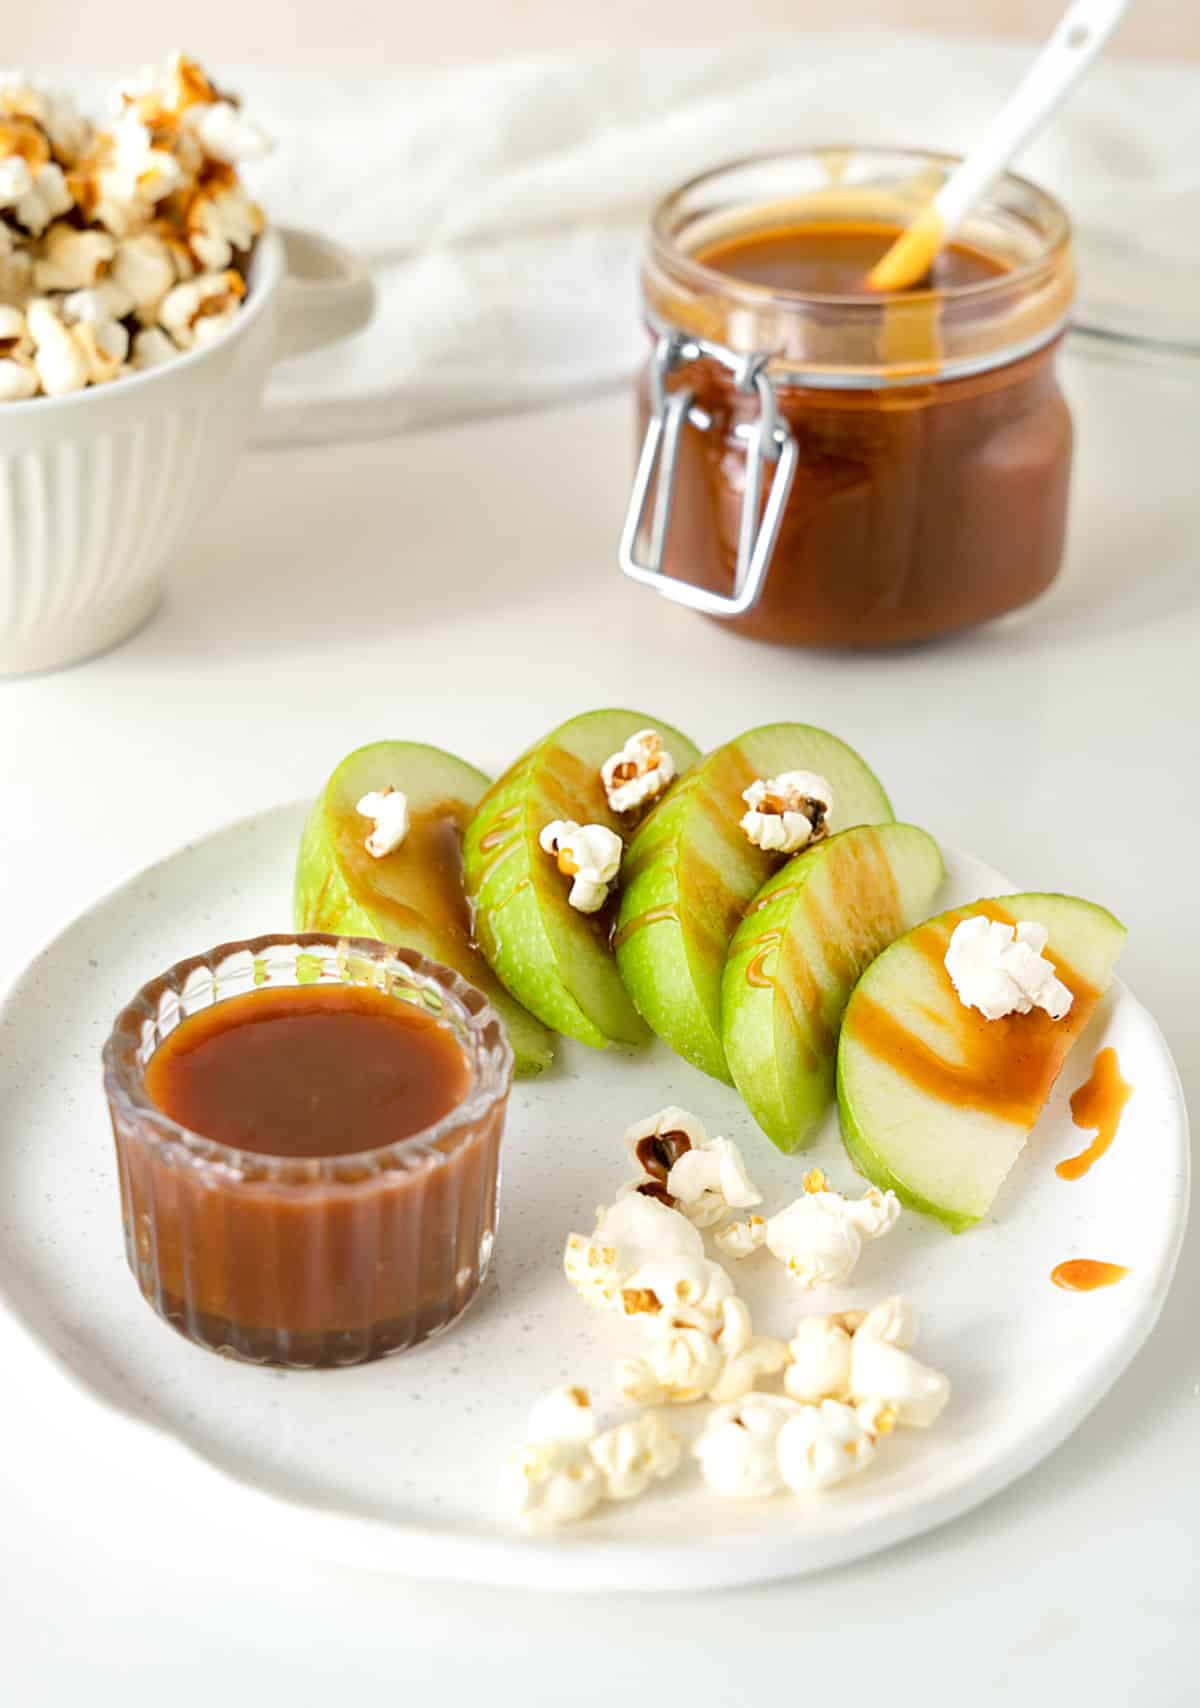 White plate with green apple slices, popcorn and caramel. White background with caramel jar.